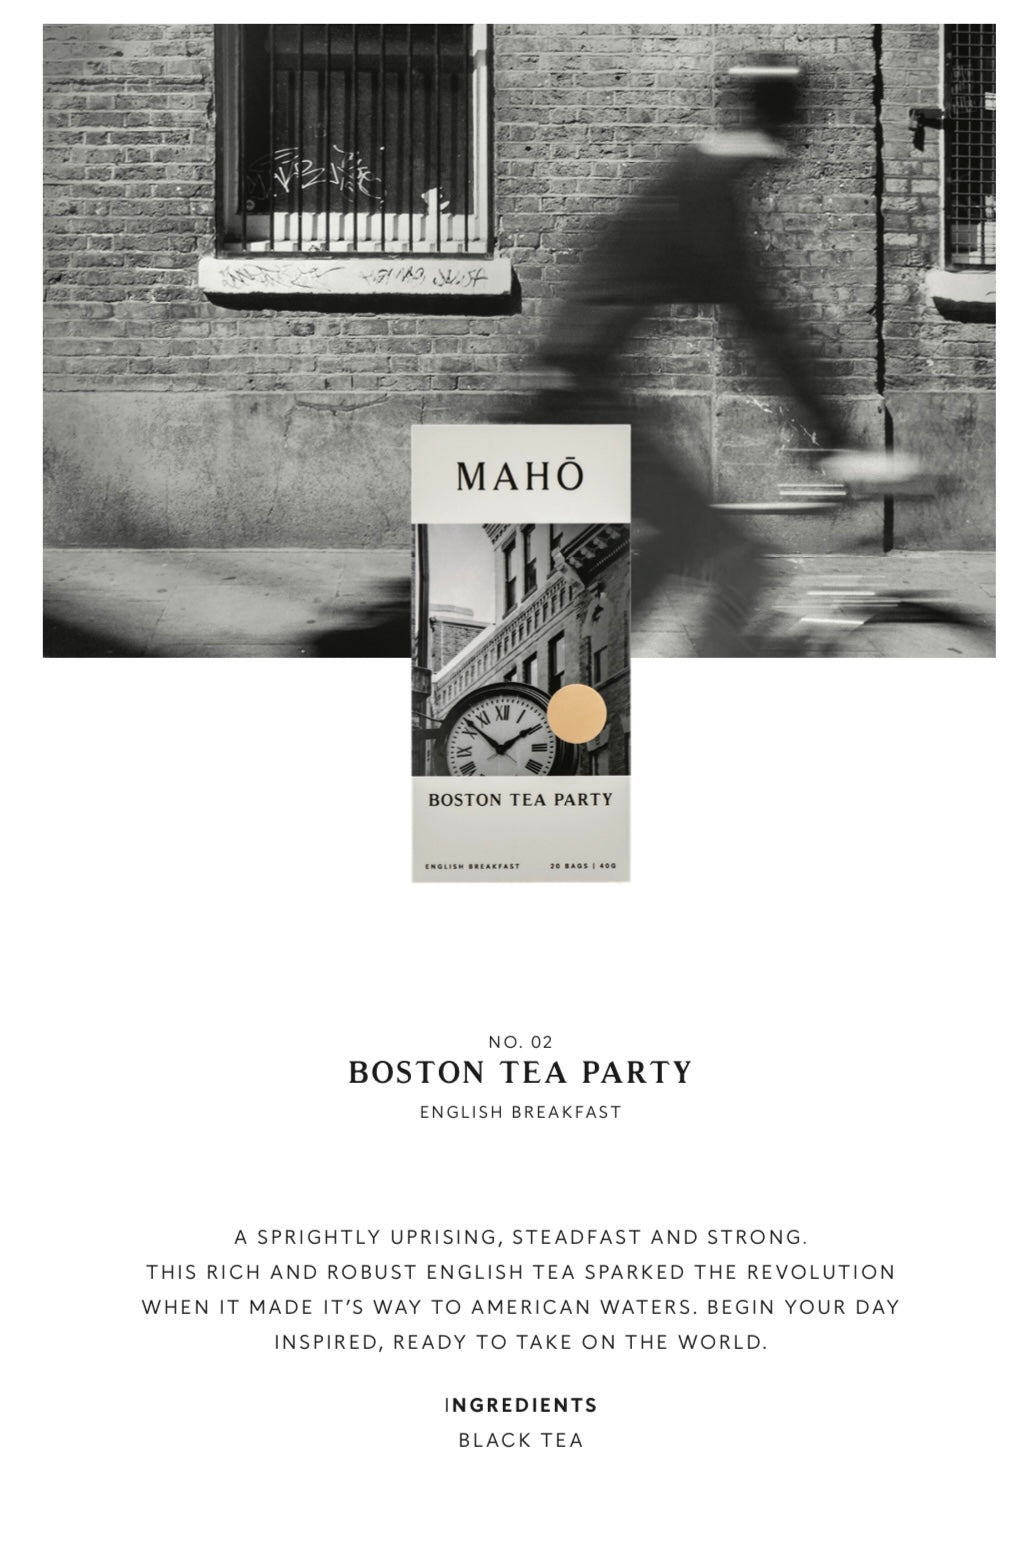 Boston Tea Party with Stainless Steel canister